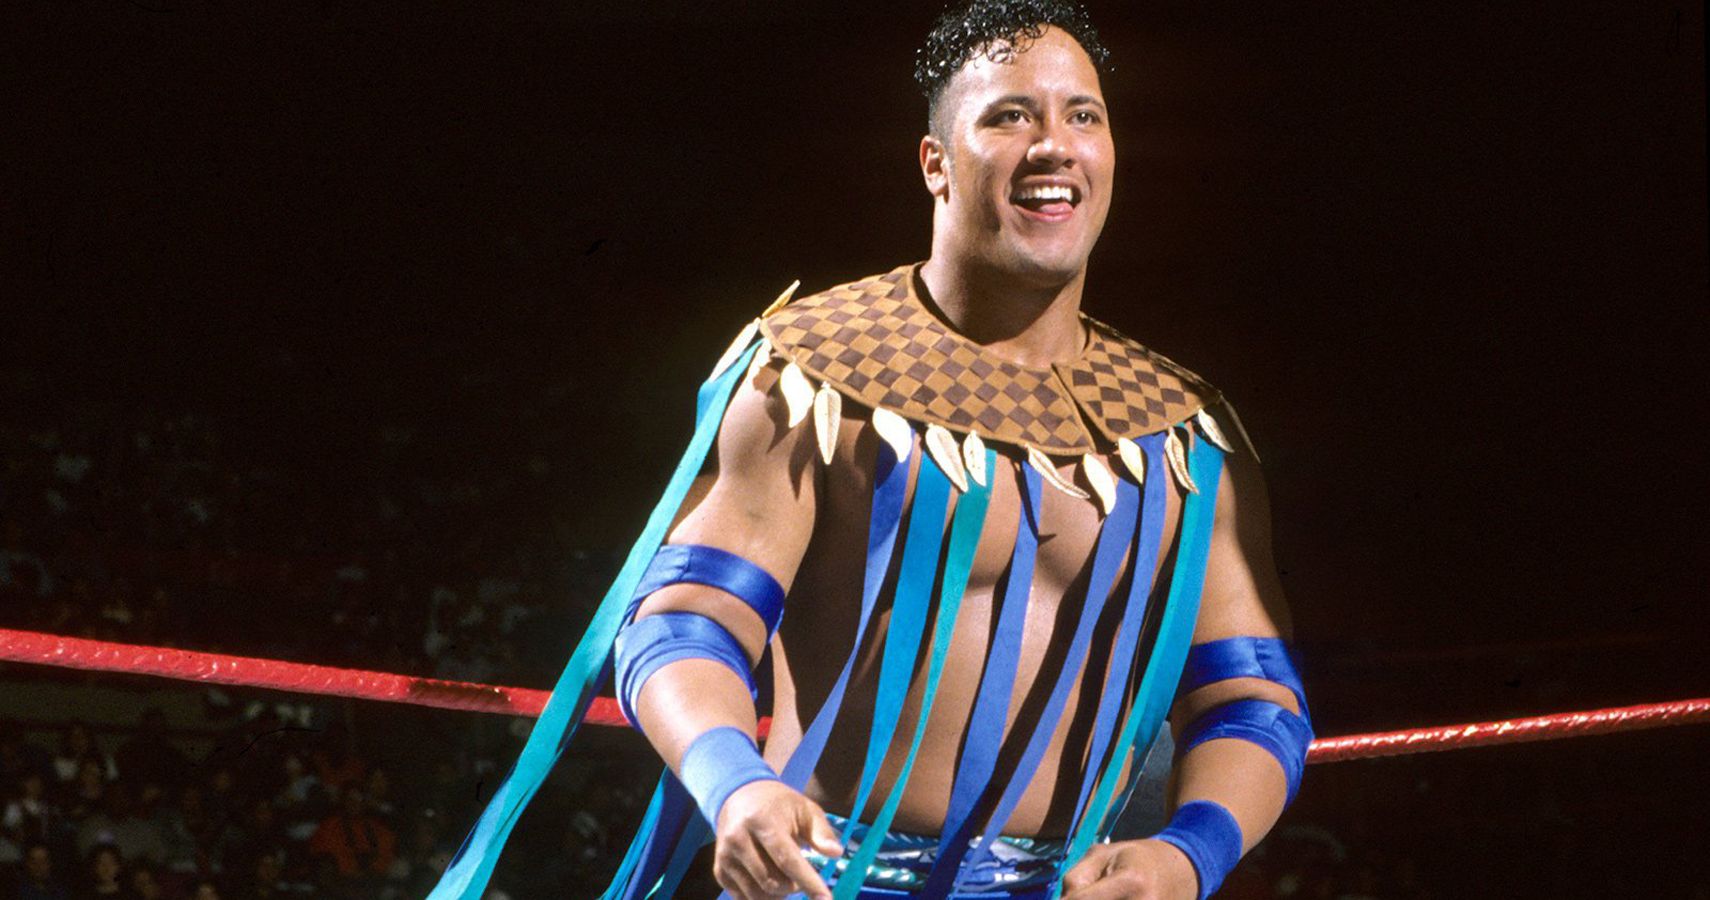 10 vintage photos of the Rock